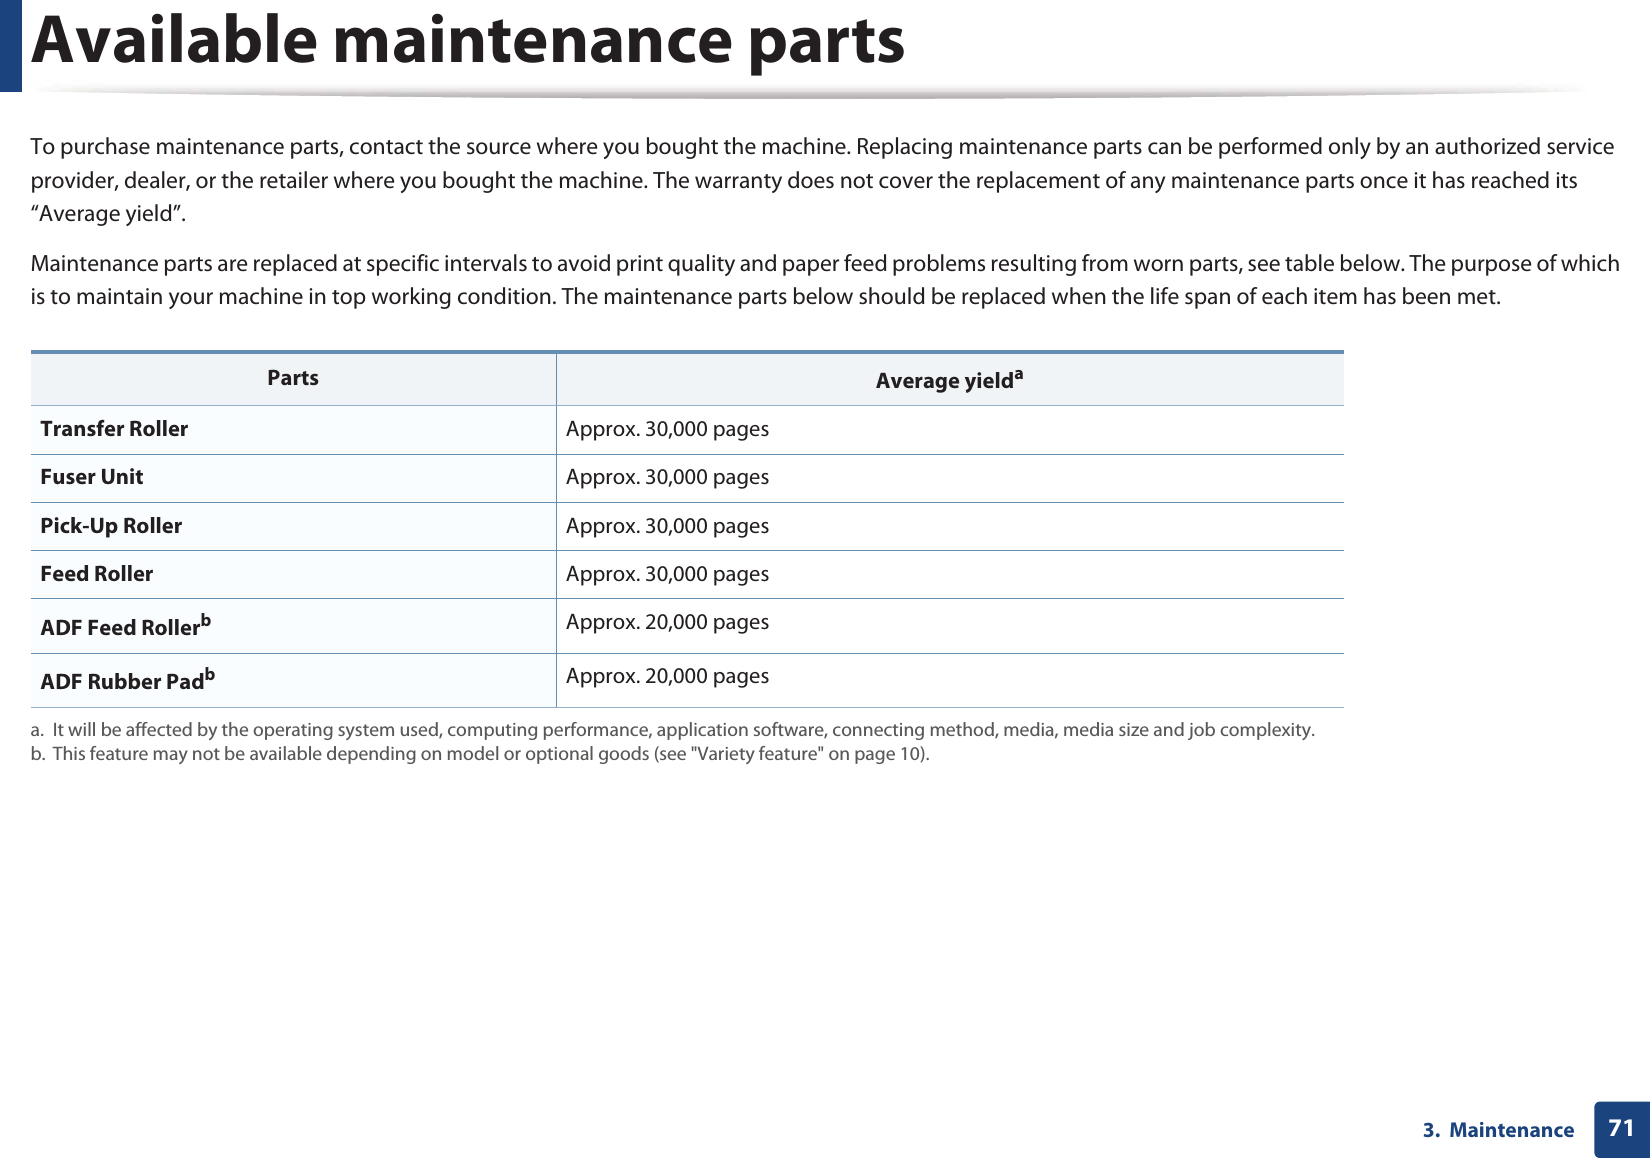 713.  MaintenanceAvailable maintenance partsTo purchase maintenance parts, contact the source where you bought the machine. Replacing maintenance parts can be performed only by an authorized service provider, dealer, or the retailer where you bought the machine. The warranty does not cover the replacement of any maintenance parts once it has reached its “Average yield”.Maintenance parts are replaced at specific intervals to avoid print quality and paper feed problems resulting from worn parts, see table below. The purpose of which is to maintain your machine in top working condition. The maintenance parts below should be replaced when the life span of each item has been met.Parts Average yieldaa. It will be affected by the operating system used, computing performance, application software, connecting method, media, media size and job complexity.Transfer Roller Approx. 30,000 pages Fuser Unit Approx. 30,000 pagesPick-Up Roller Approx. 30,000 pagesFeed Roller Approx. 30,000 pagesADF Feed Rollerbb. This feature may not be available depending on model or optional goods (see &quot;Variety feature&quot; on page 10).Approx. 20,000 pagesADF Rubber PadbApprox. 20,000 pages